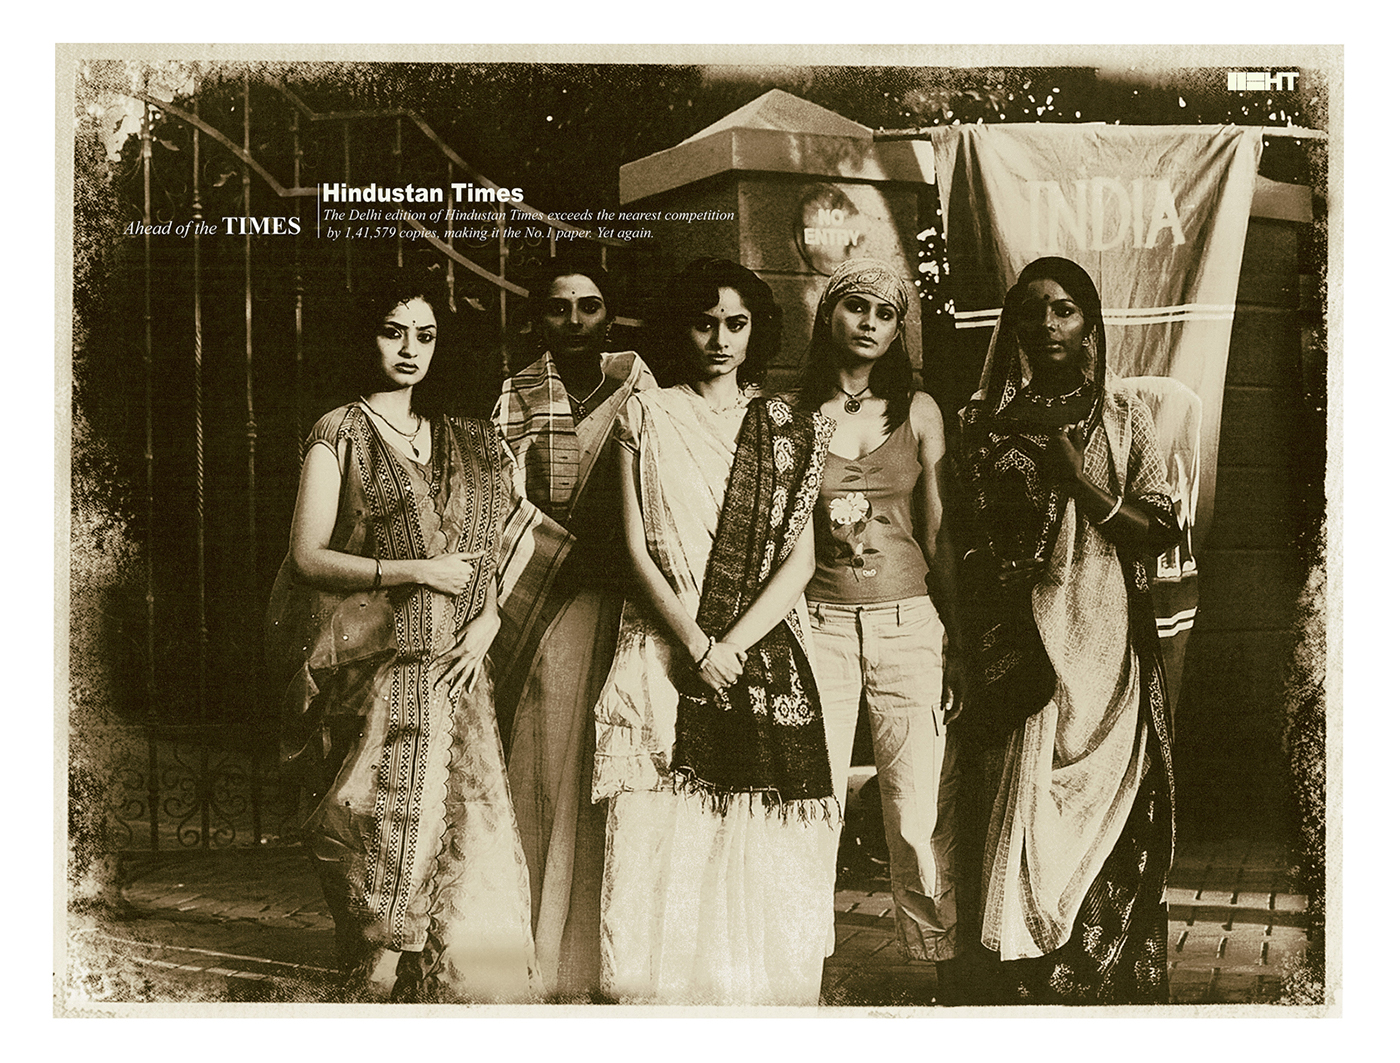 Hindustan Times HT Ad campaign film photography b&w B&W ad campaign film photography B&W old style retro photography Retro photography style grundge photography Best Indian Photographer